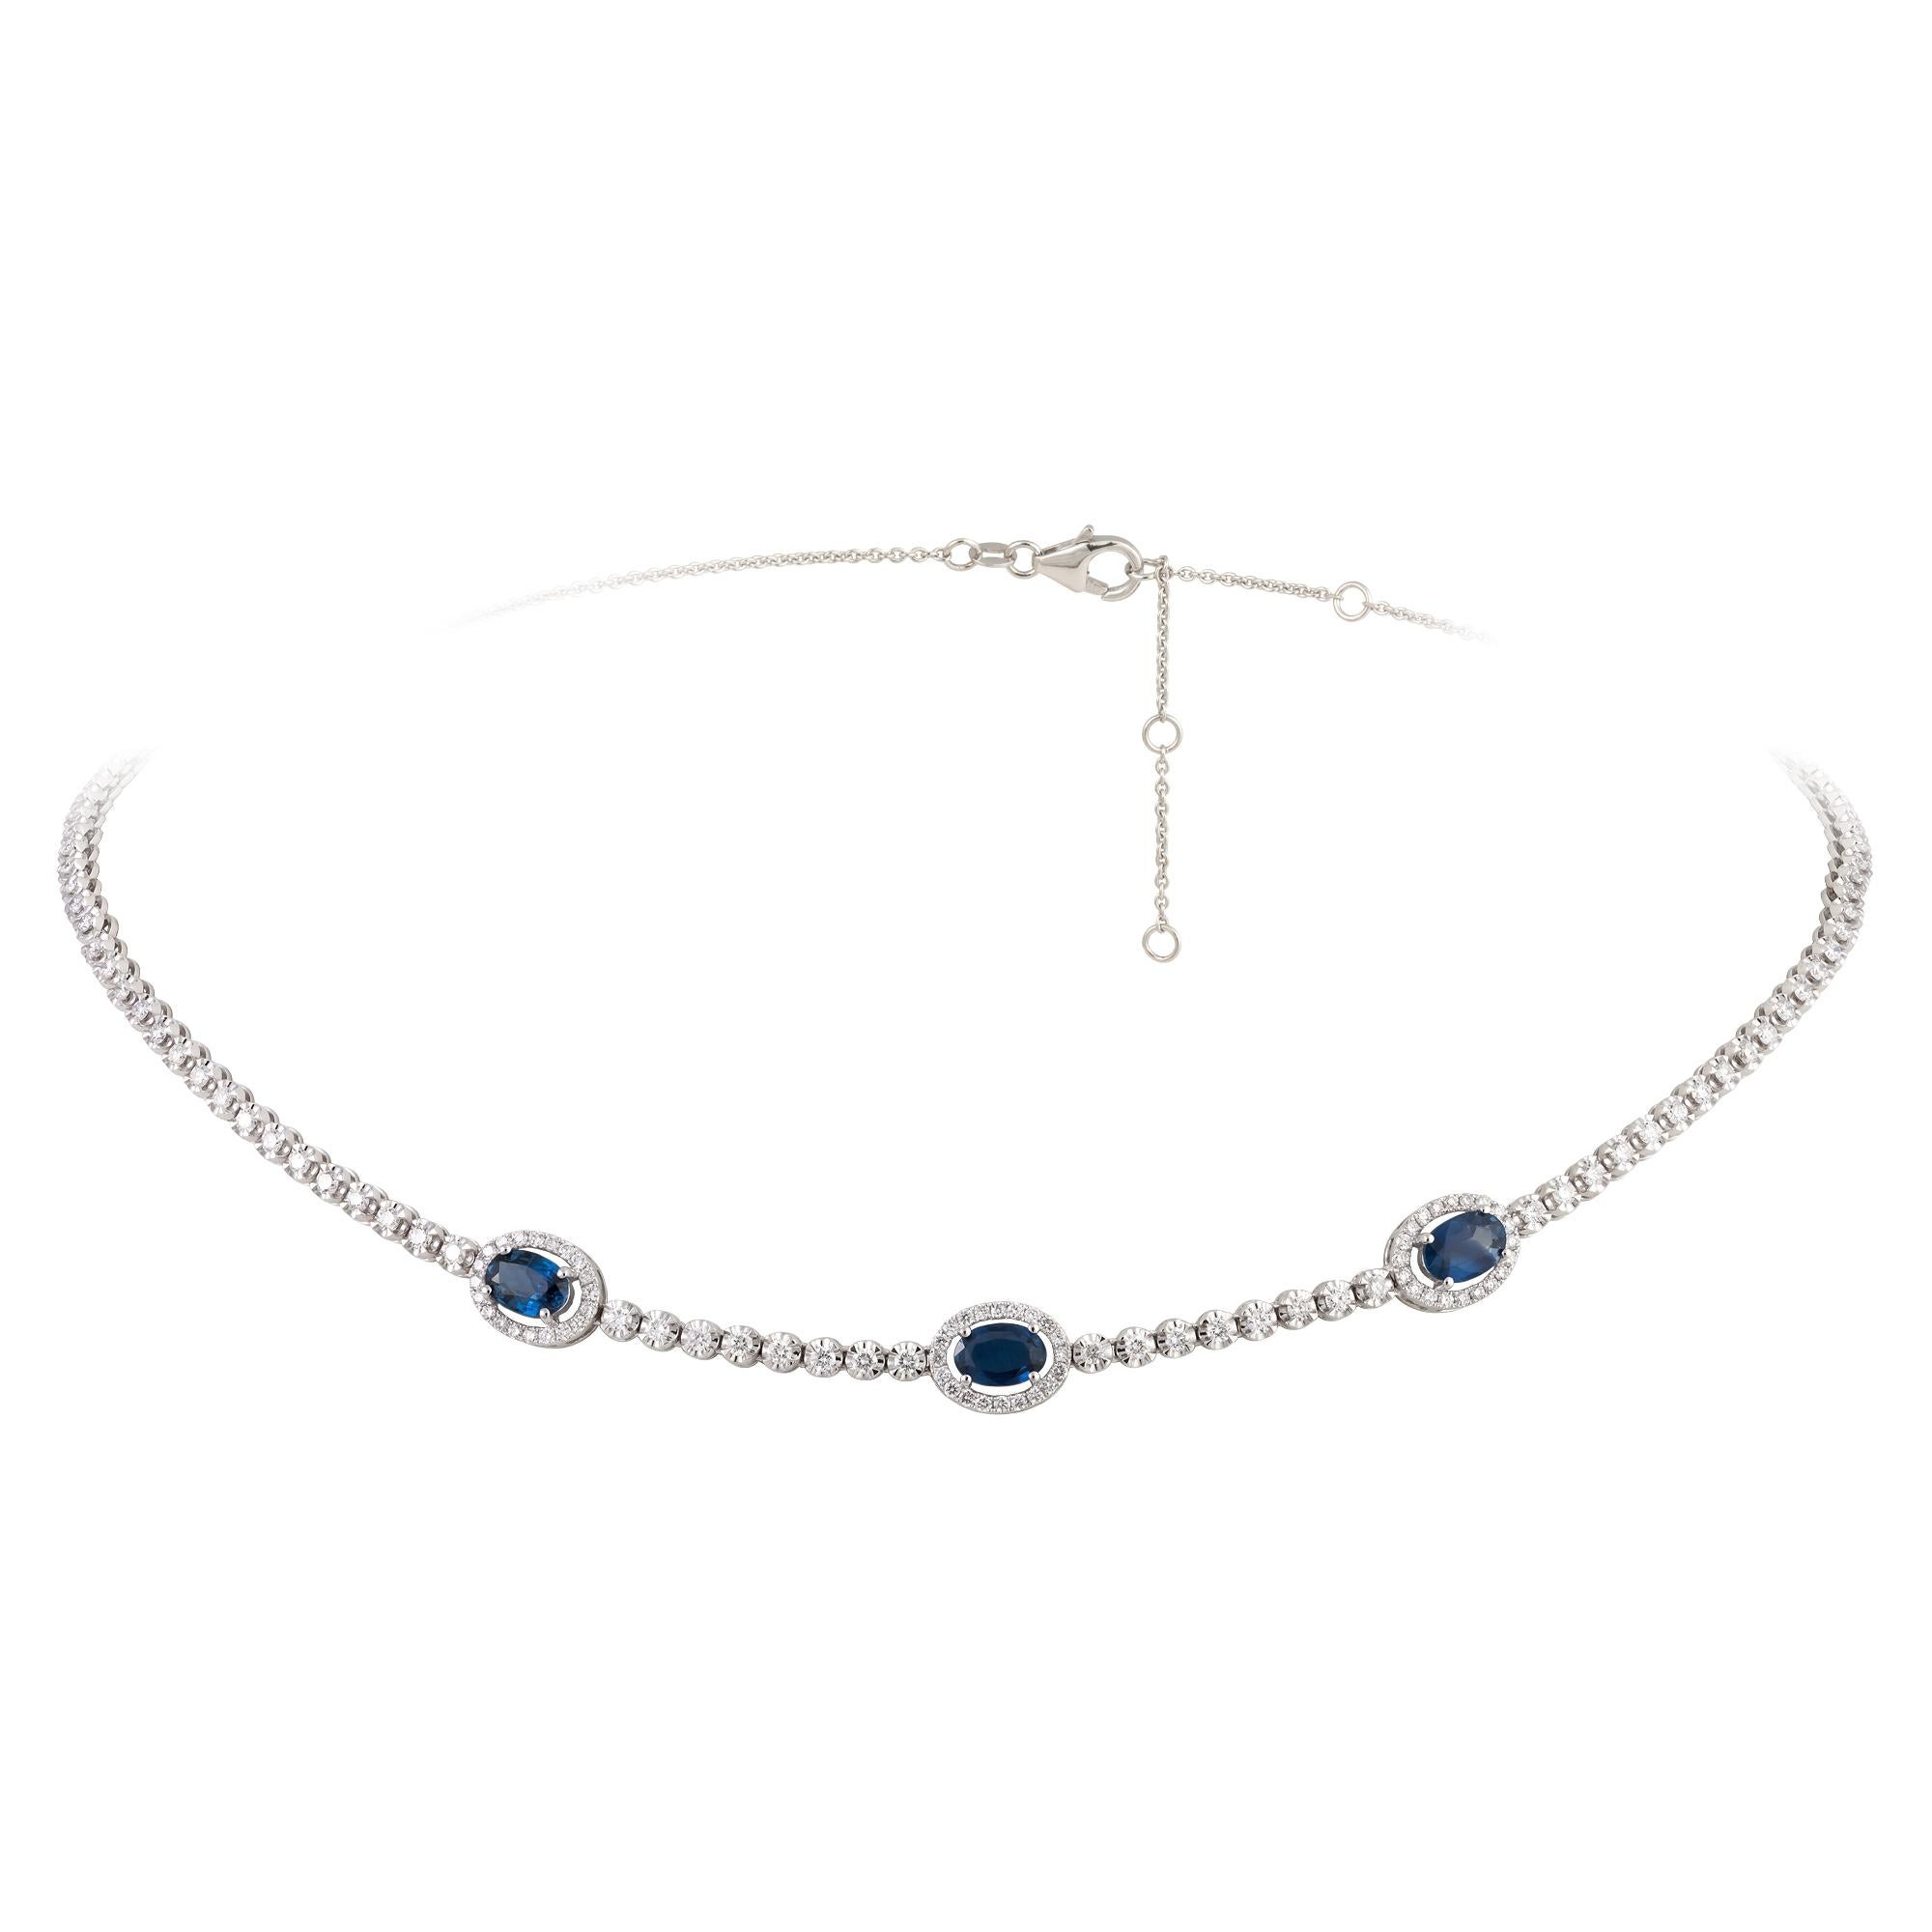 Modern Every Day Choker White Gold 18K Necklace Blue Sapphire Diamond for Her For Sale